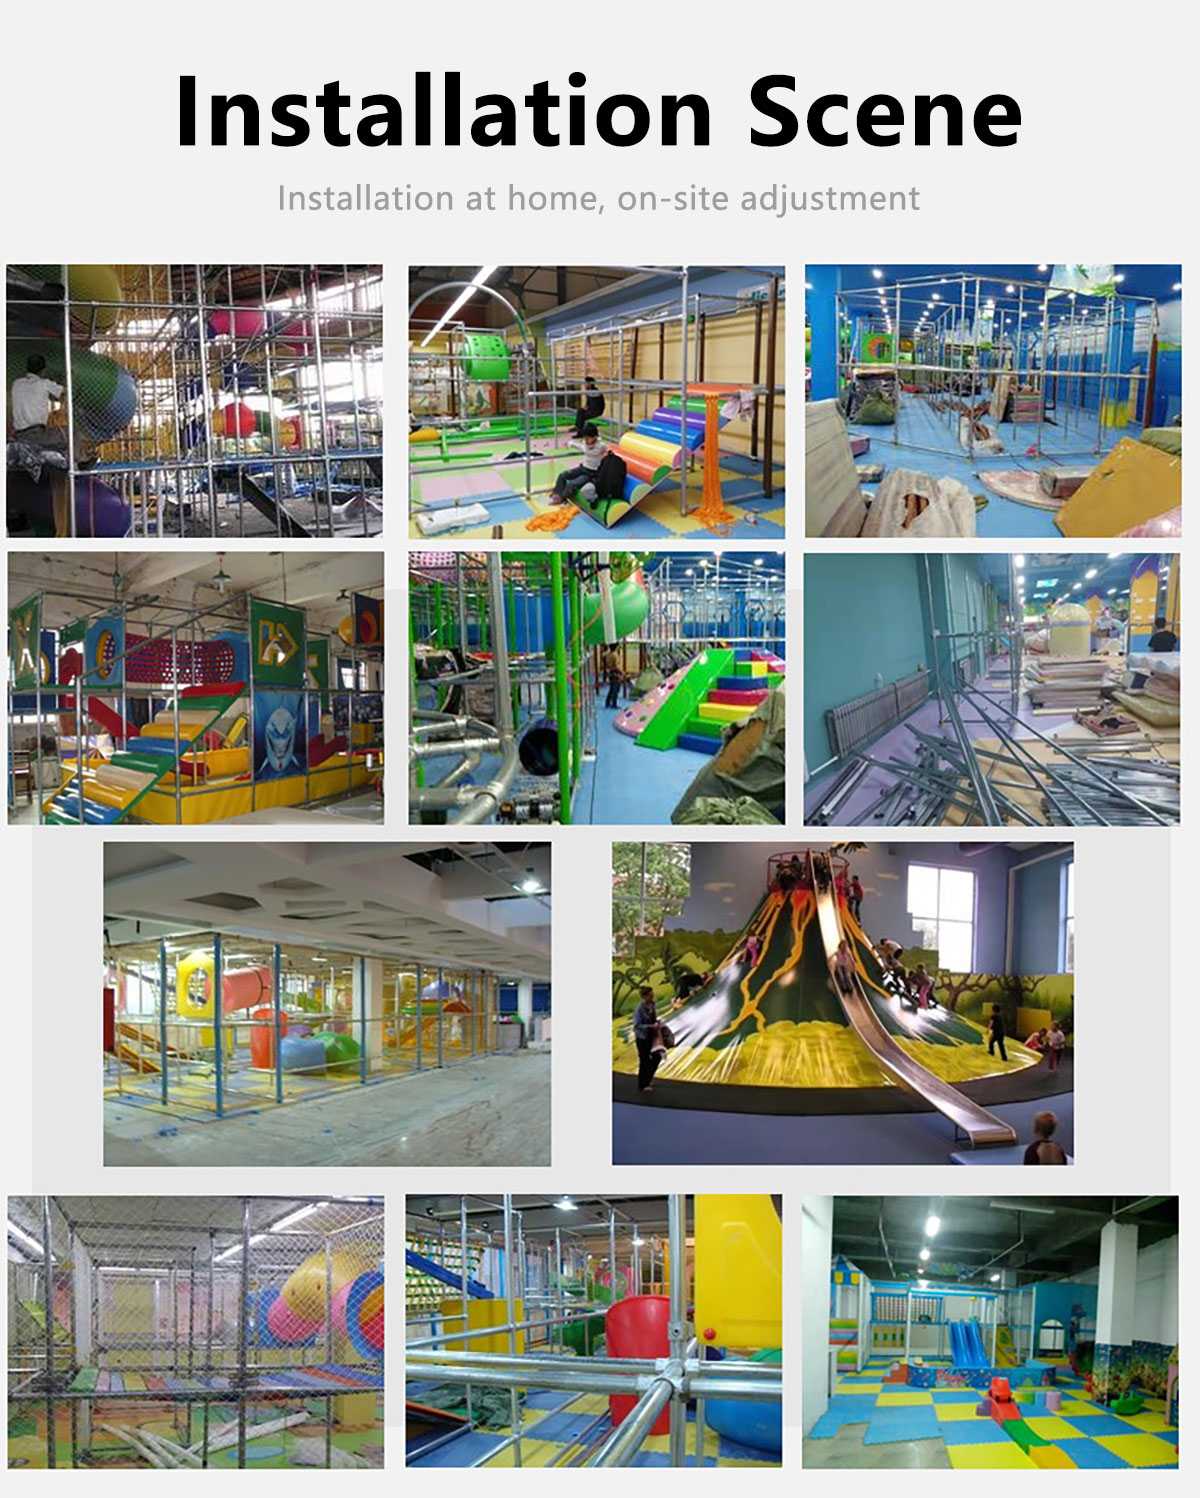 space themes for indoor playground (5)